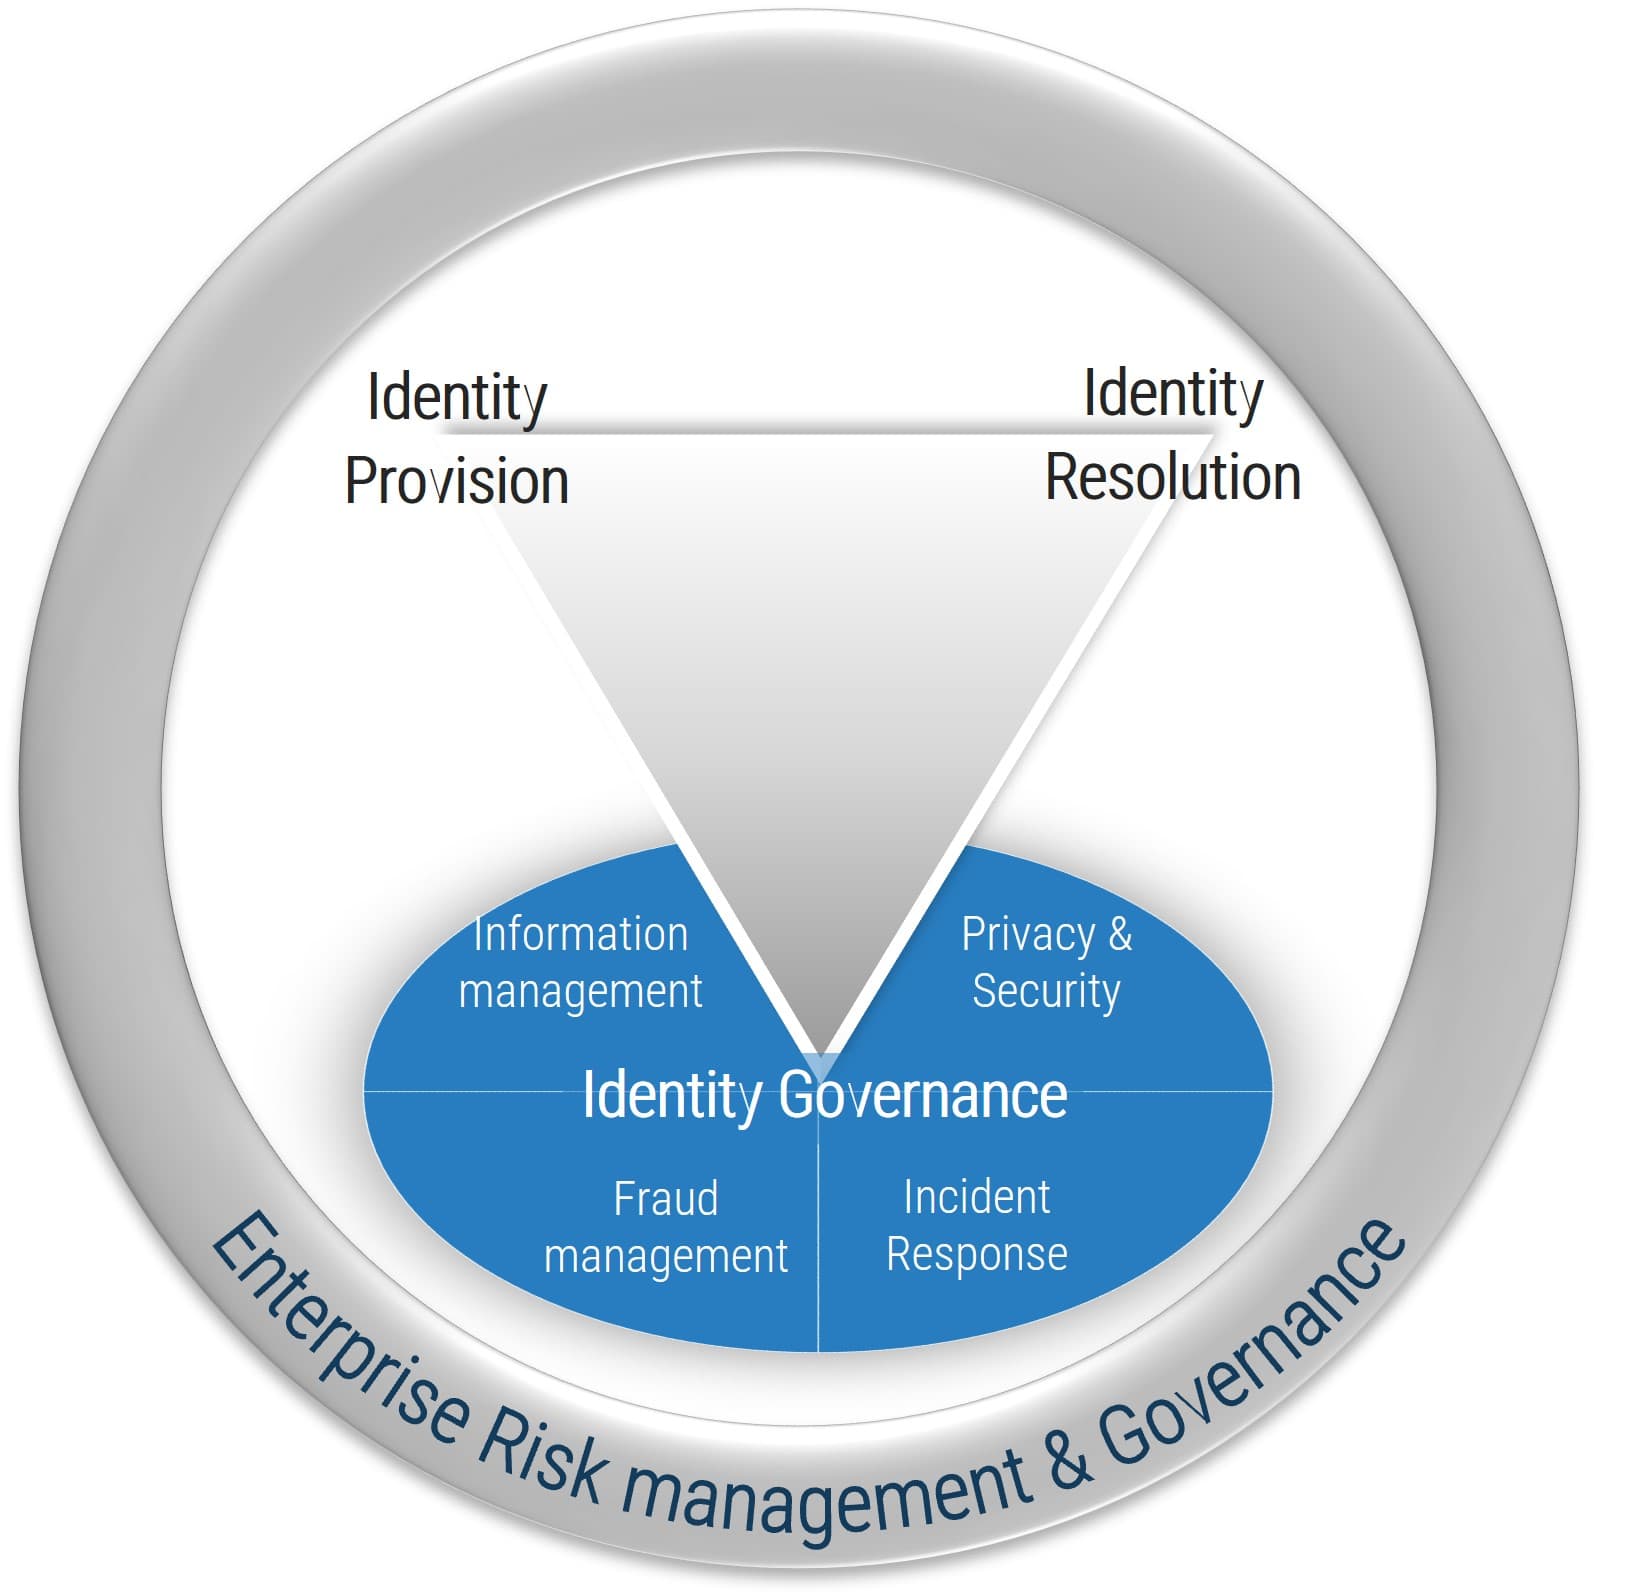 The image contains a screenshot of a diagram to demonstrate how identity governance is the key to sustainability.